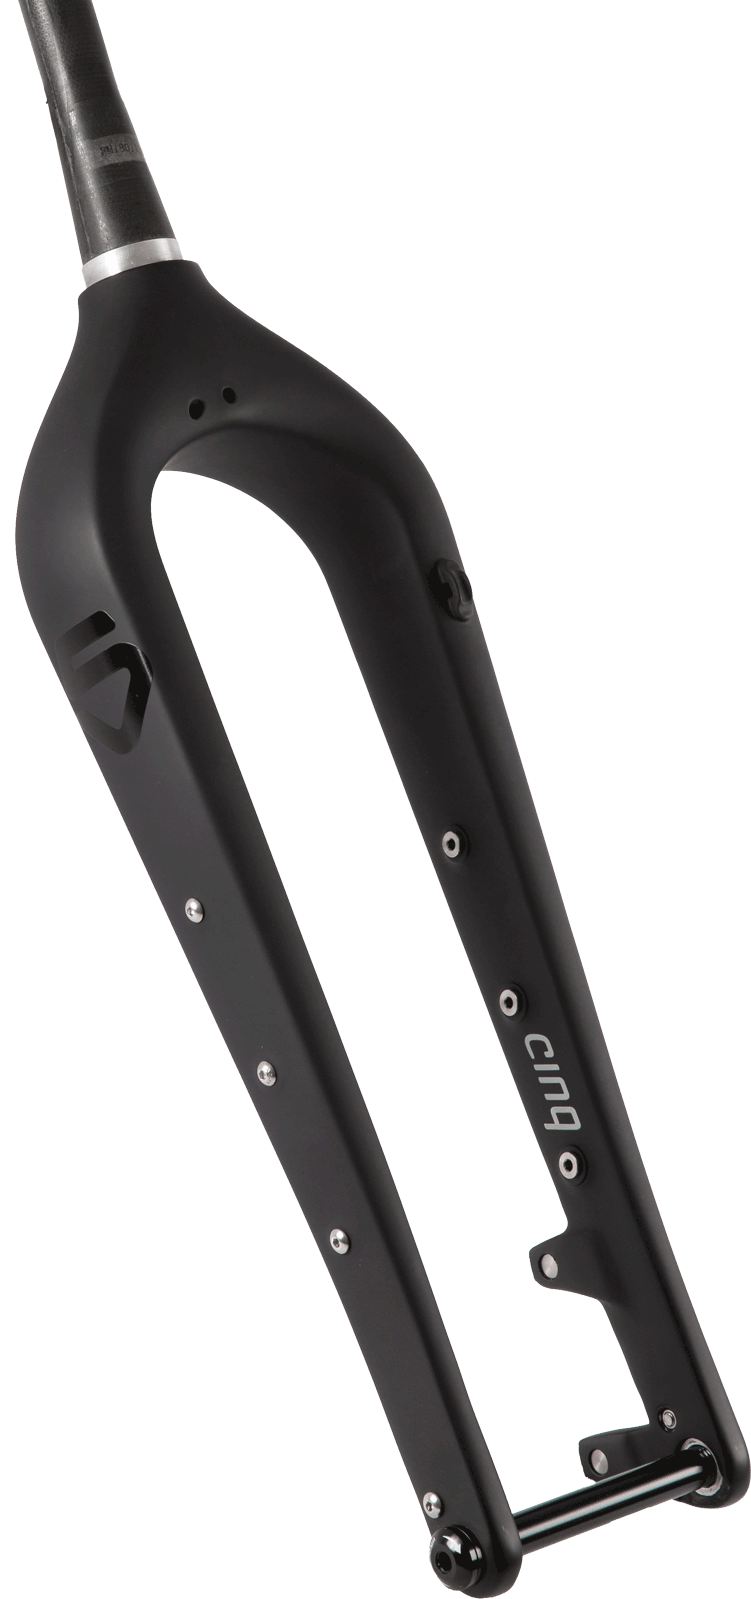 Cinq Adventure & Touring carbon forks load up cargo mounts & internal dynamo routing